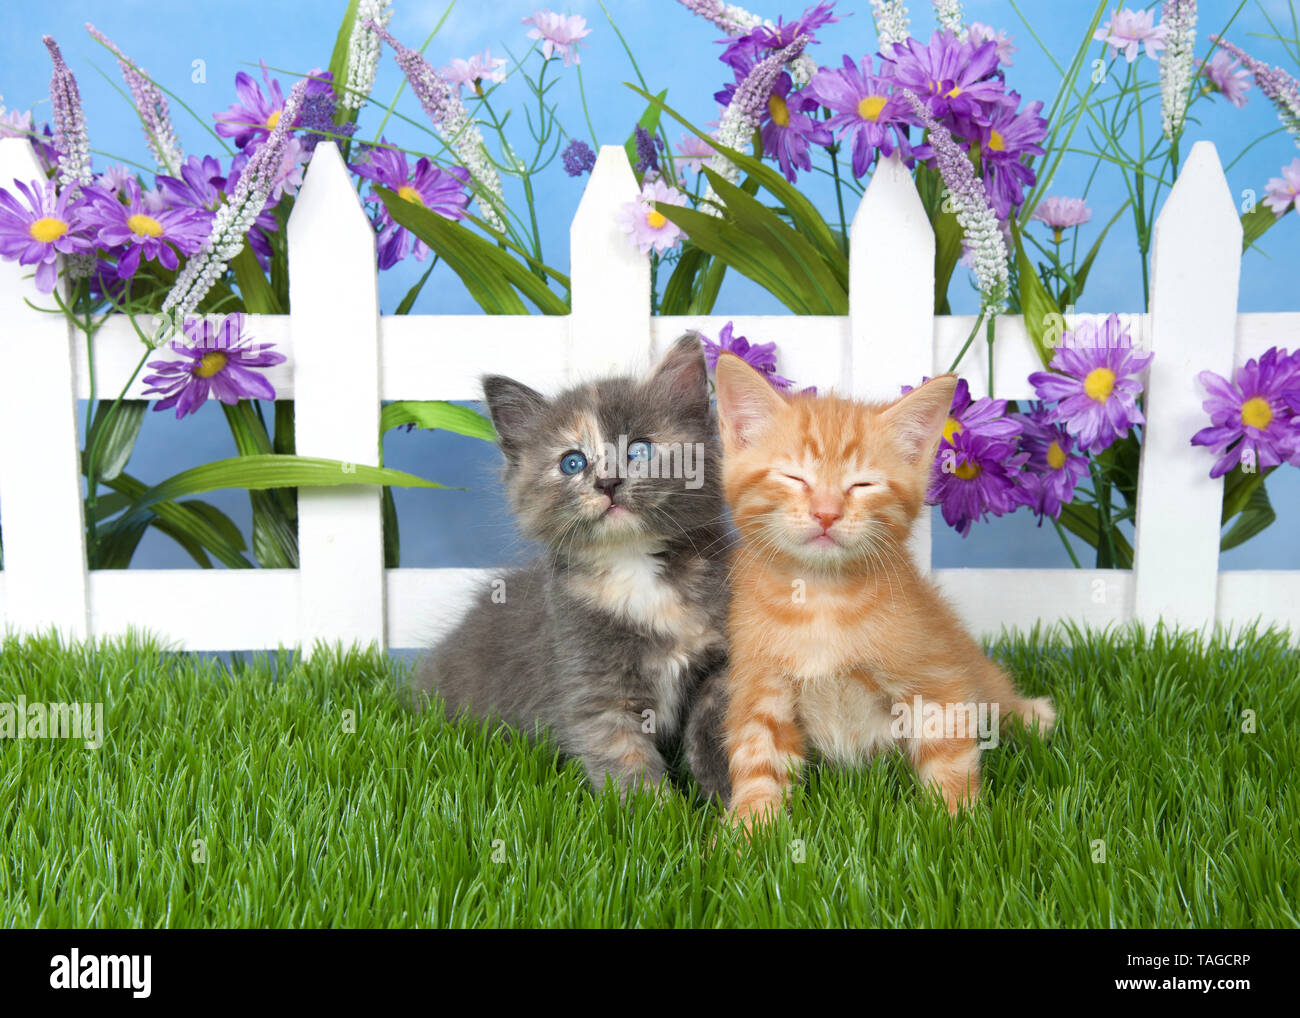 Two kittens sitting in green grass backyard in front of small white picket fence, tortie looking up, orange tabby eyes closed. purple flowers growing  Stock Photo